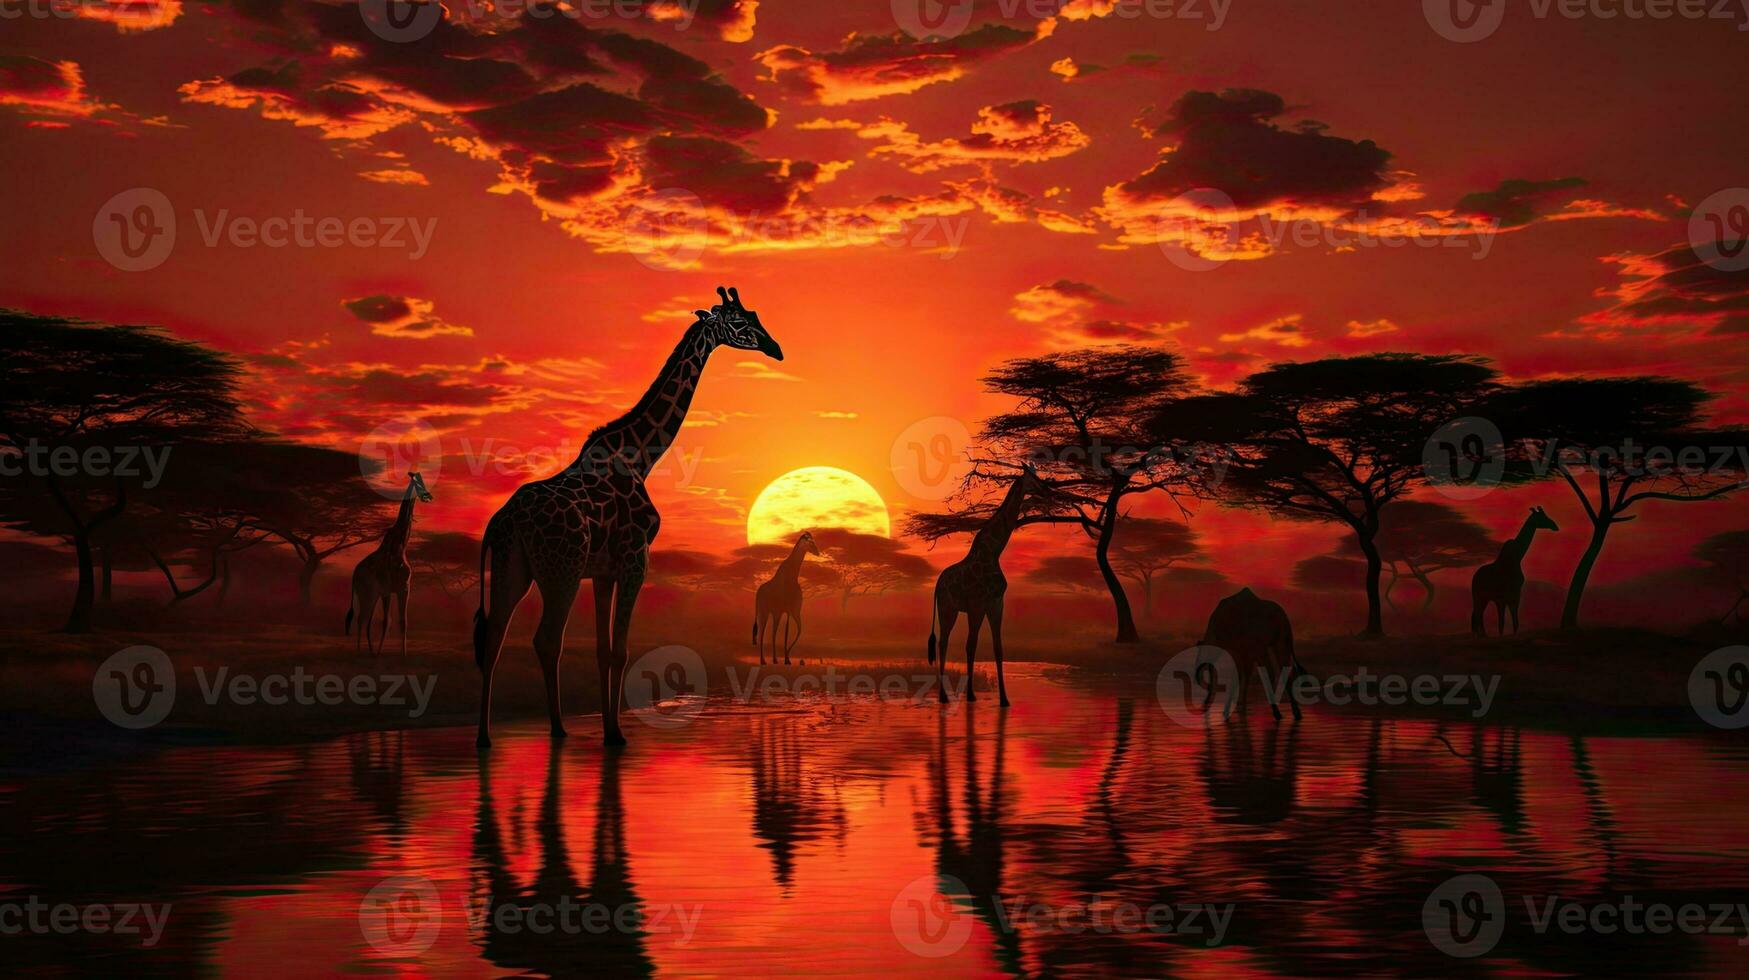 Giraffes in Africa during sunset photo